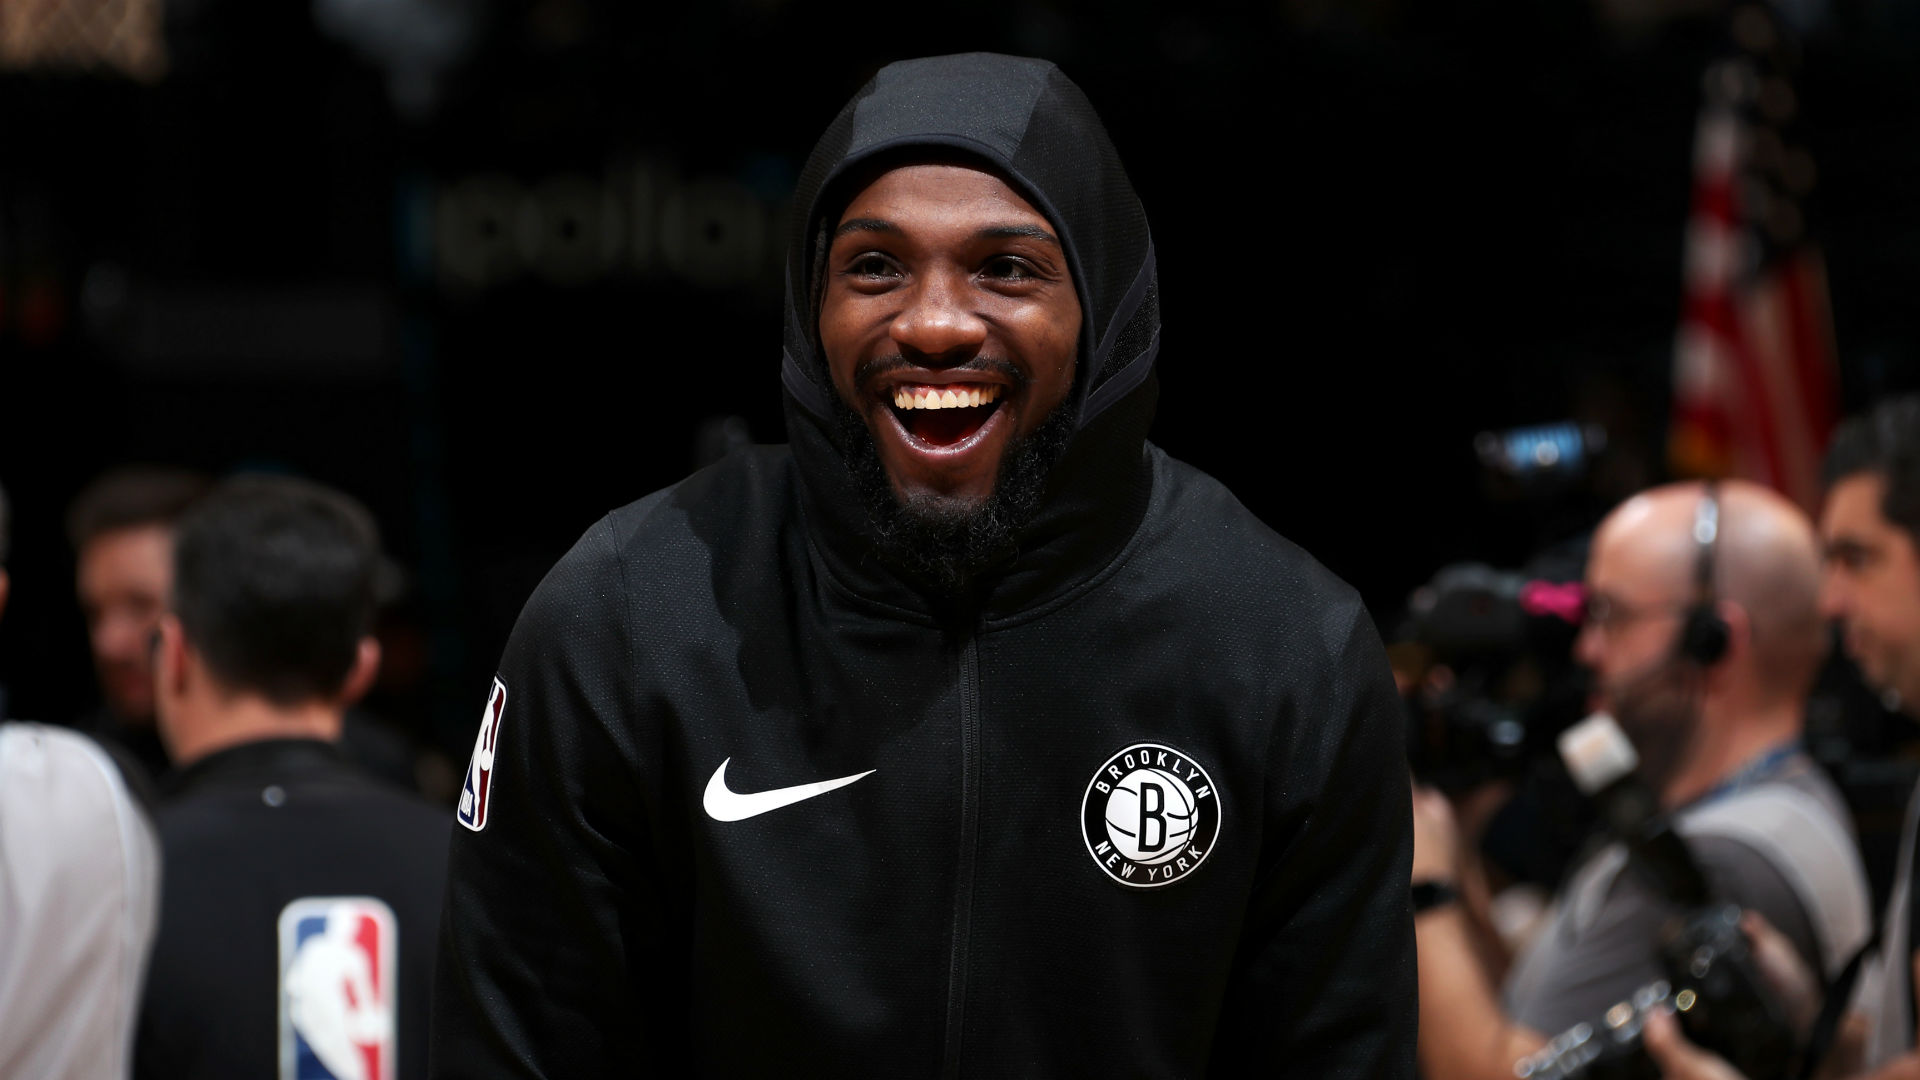 Report: Kenneth Faried to sign with Rockets following contract buyout with Nets | NBA ...1920 x 1080